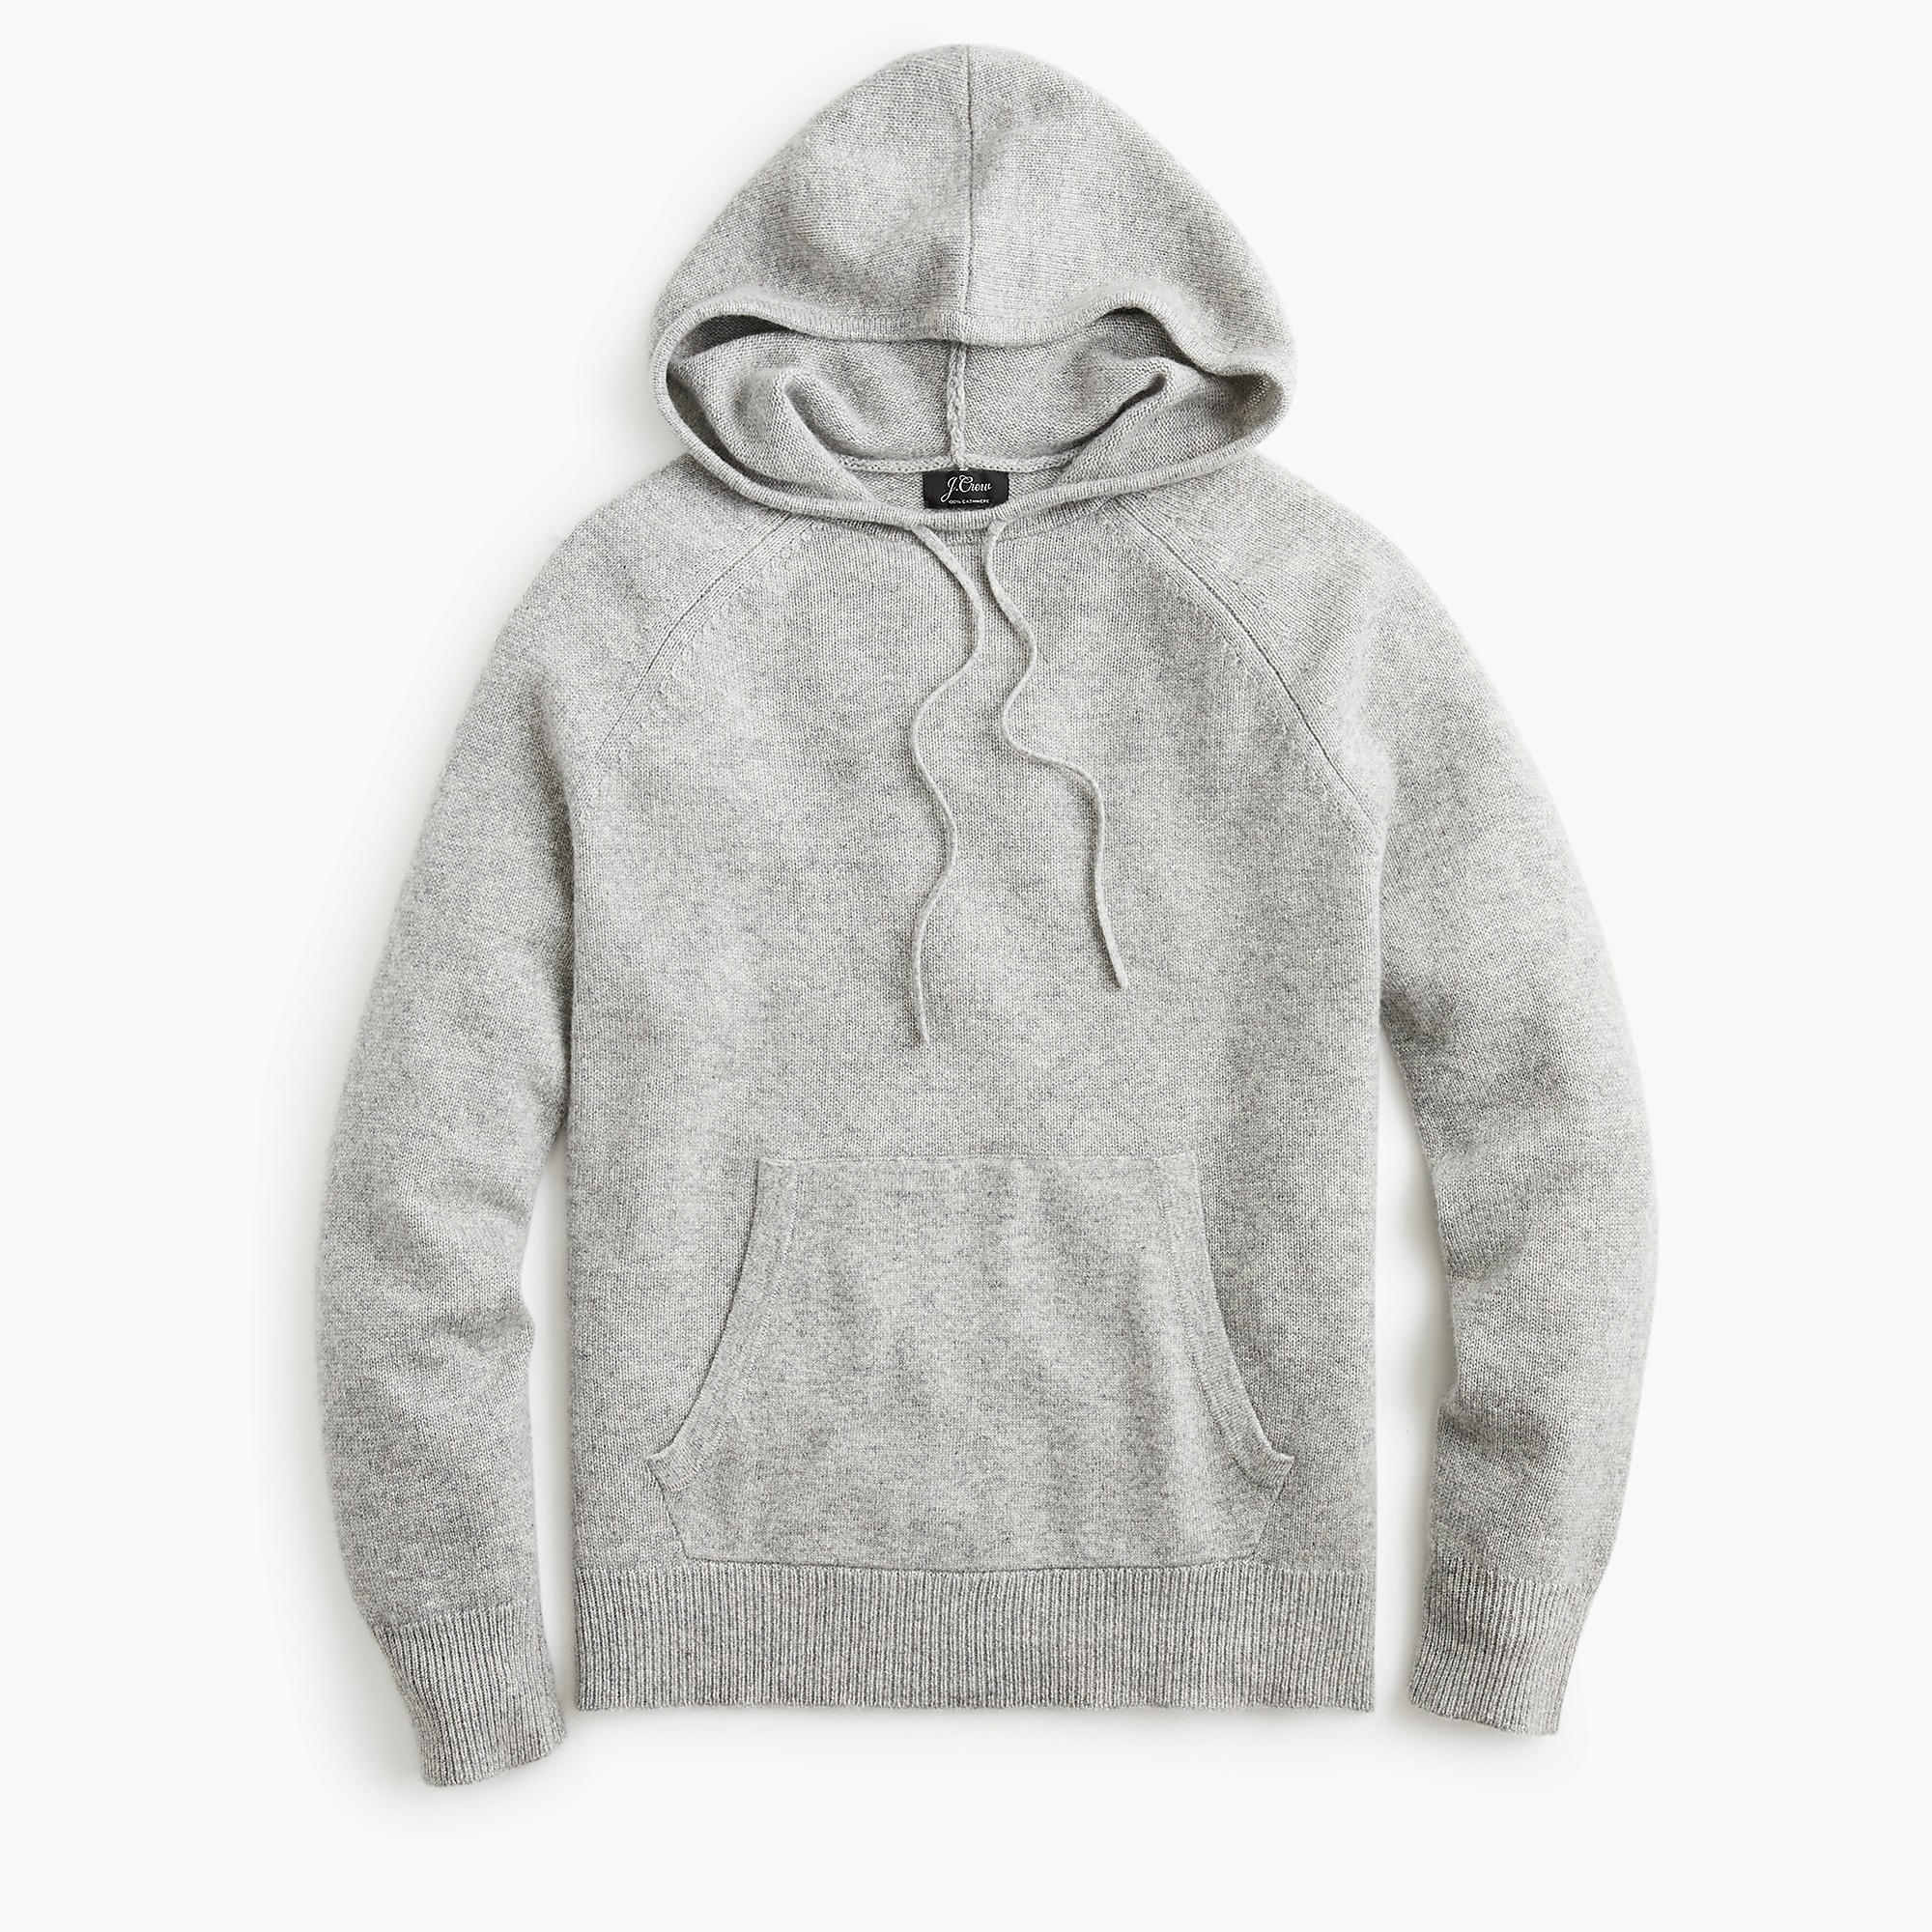 J.Crew: Long Sleeve Everyday Cashmere Pullover Hoodie